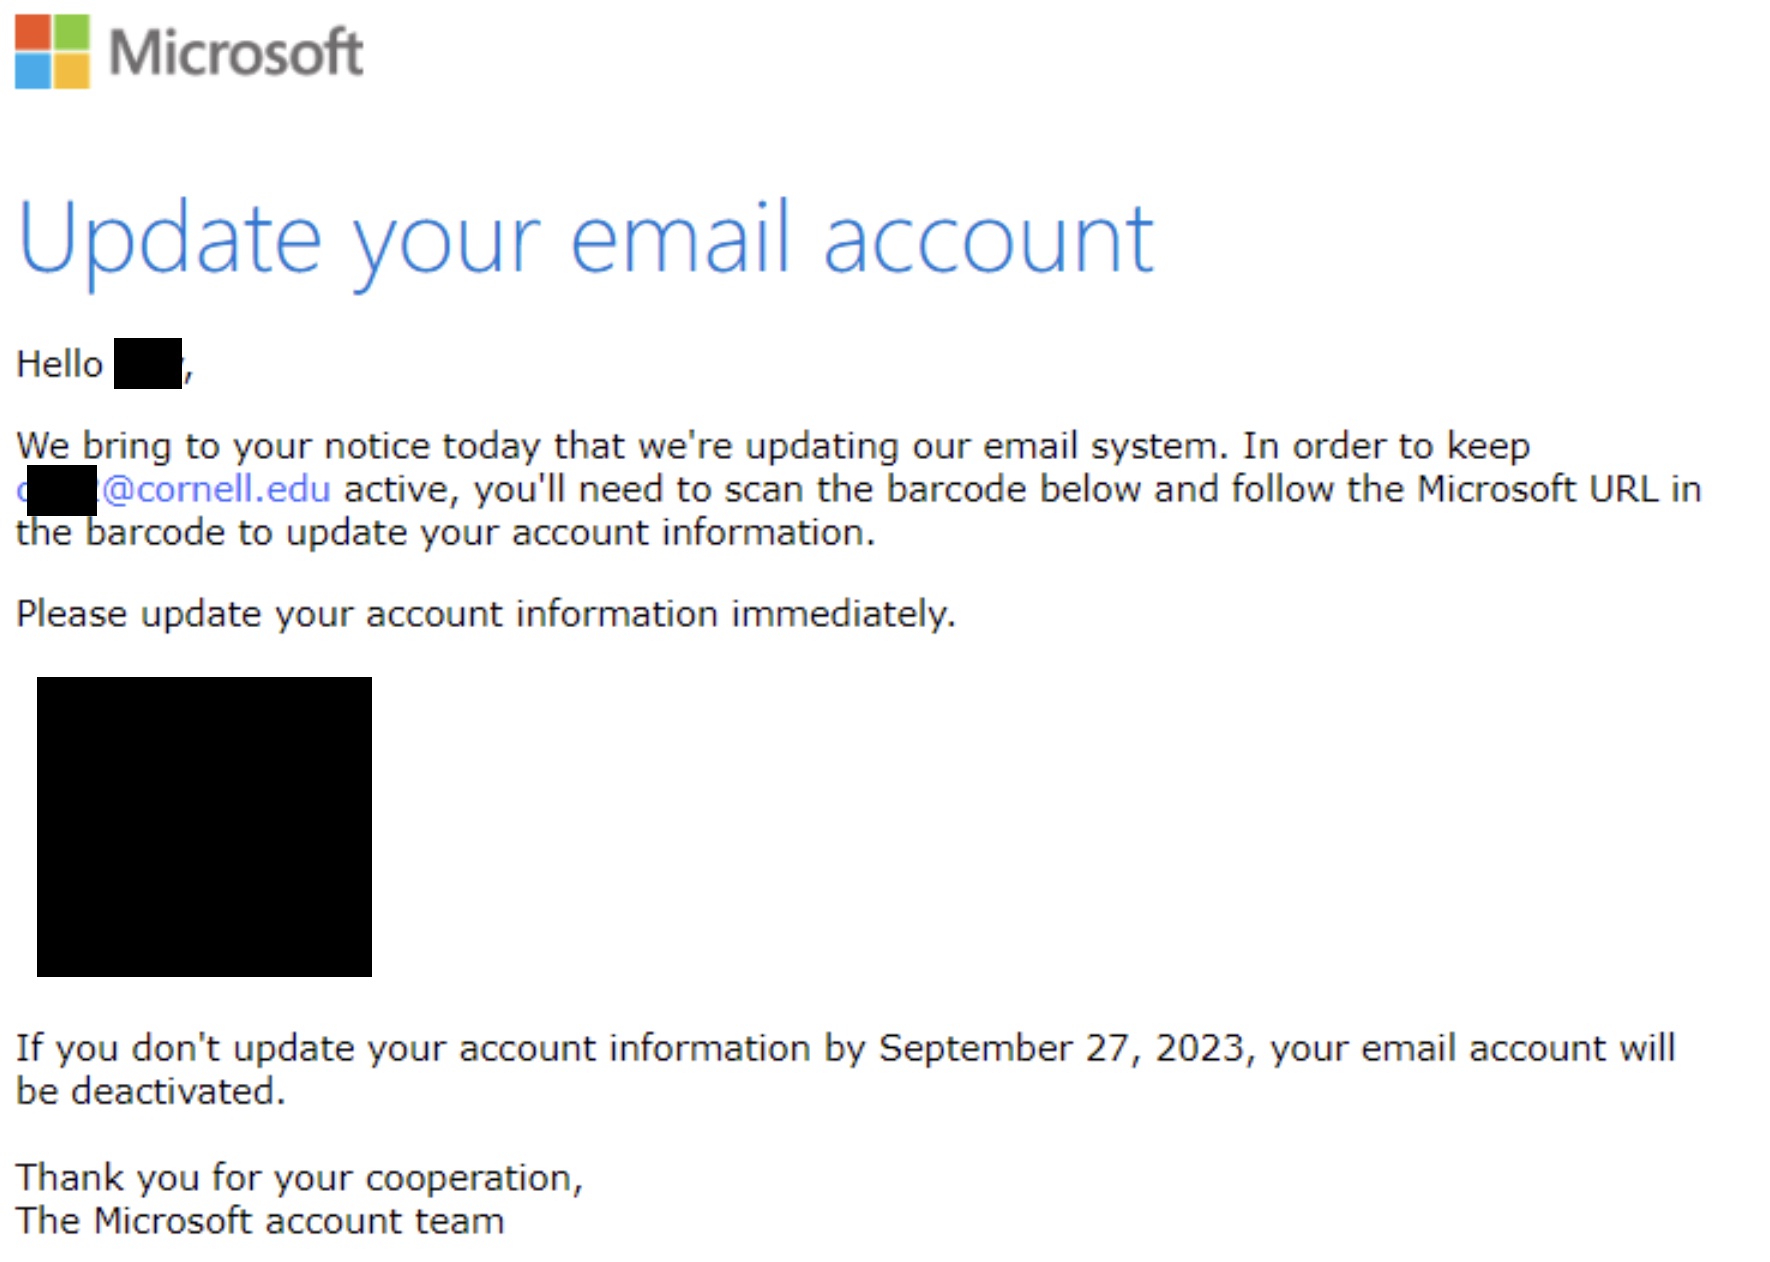 A fake Microsoft-branded notification with the heading "Update your email account" asking the recipient to scan a QR code.